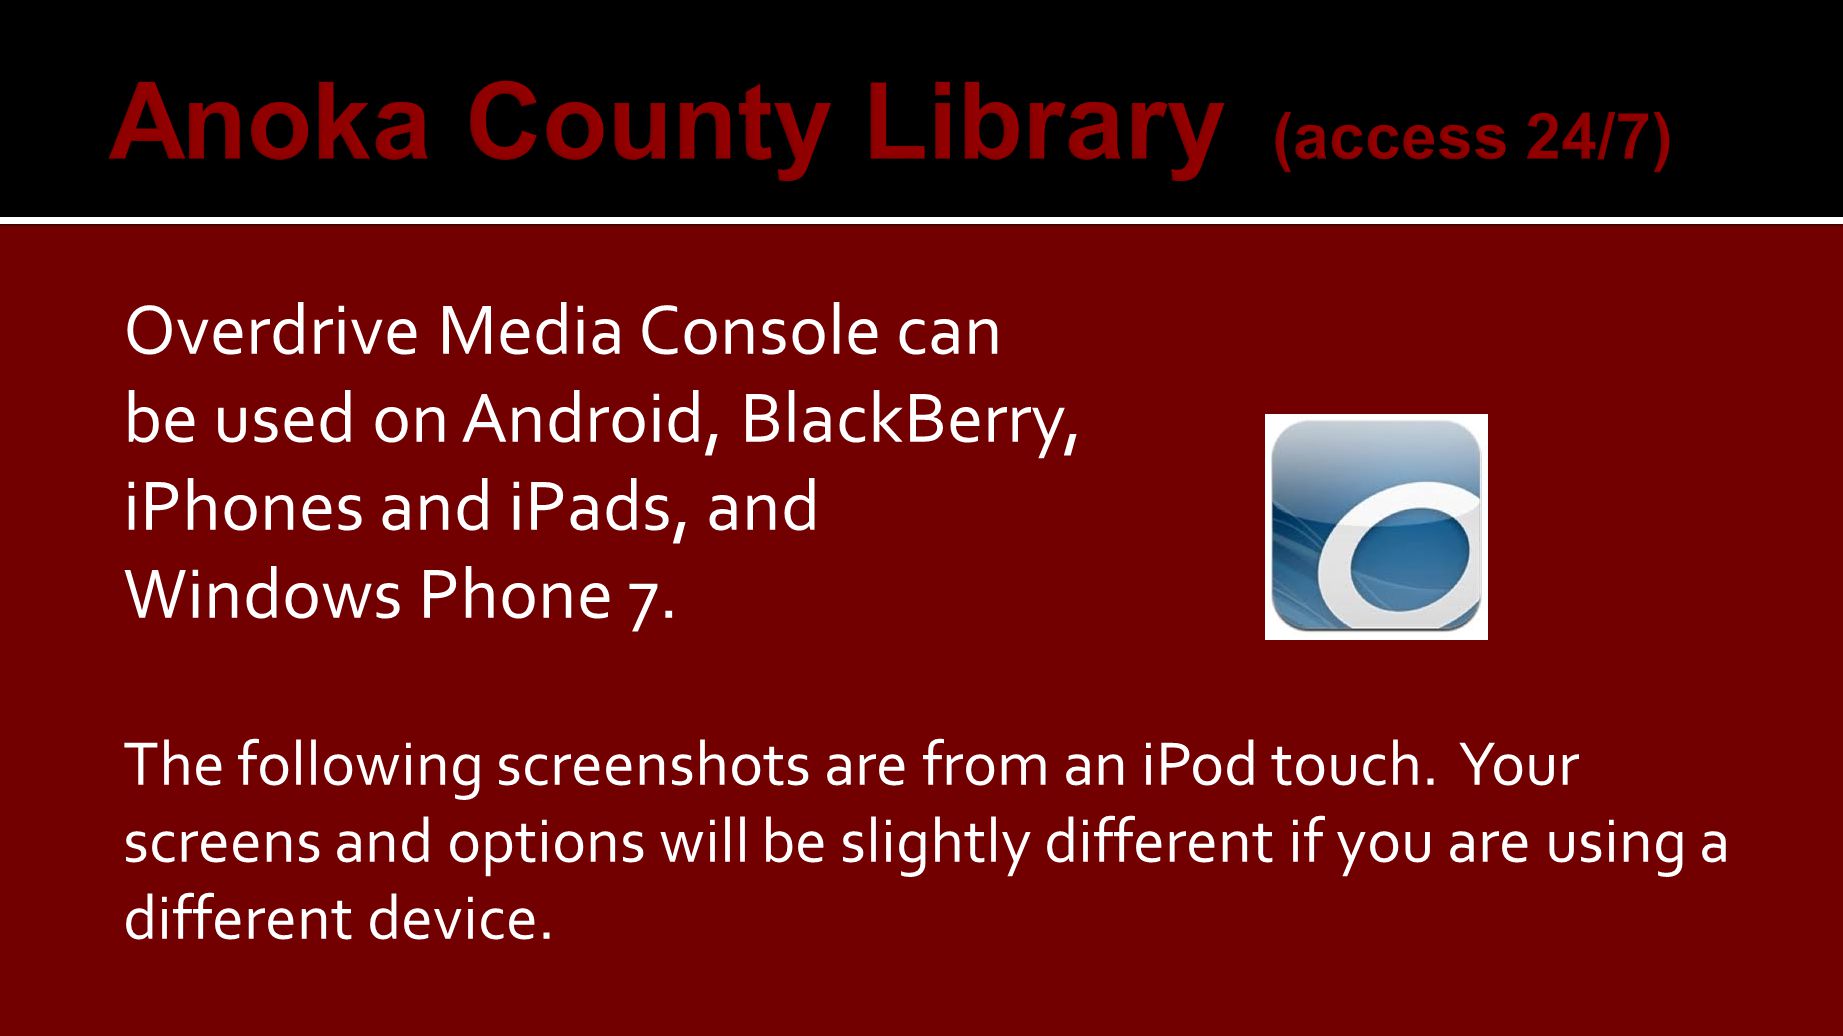 Overdrive Media Console can be used on Android, BlackBerry, iPhones and iPads, and Windows Phone 7.